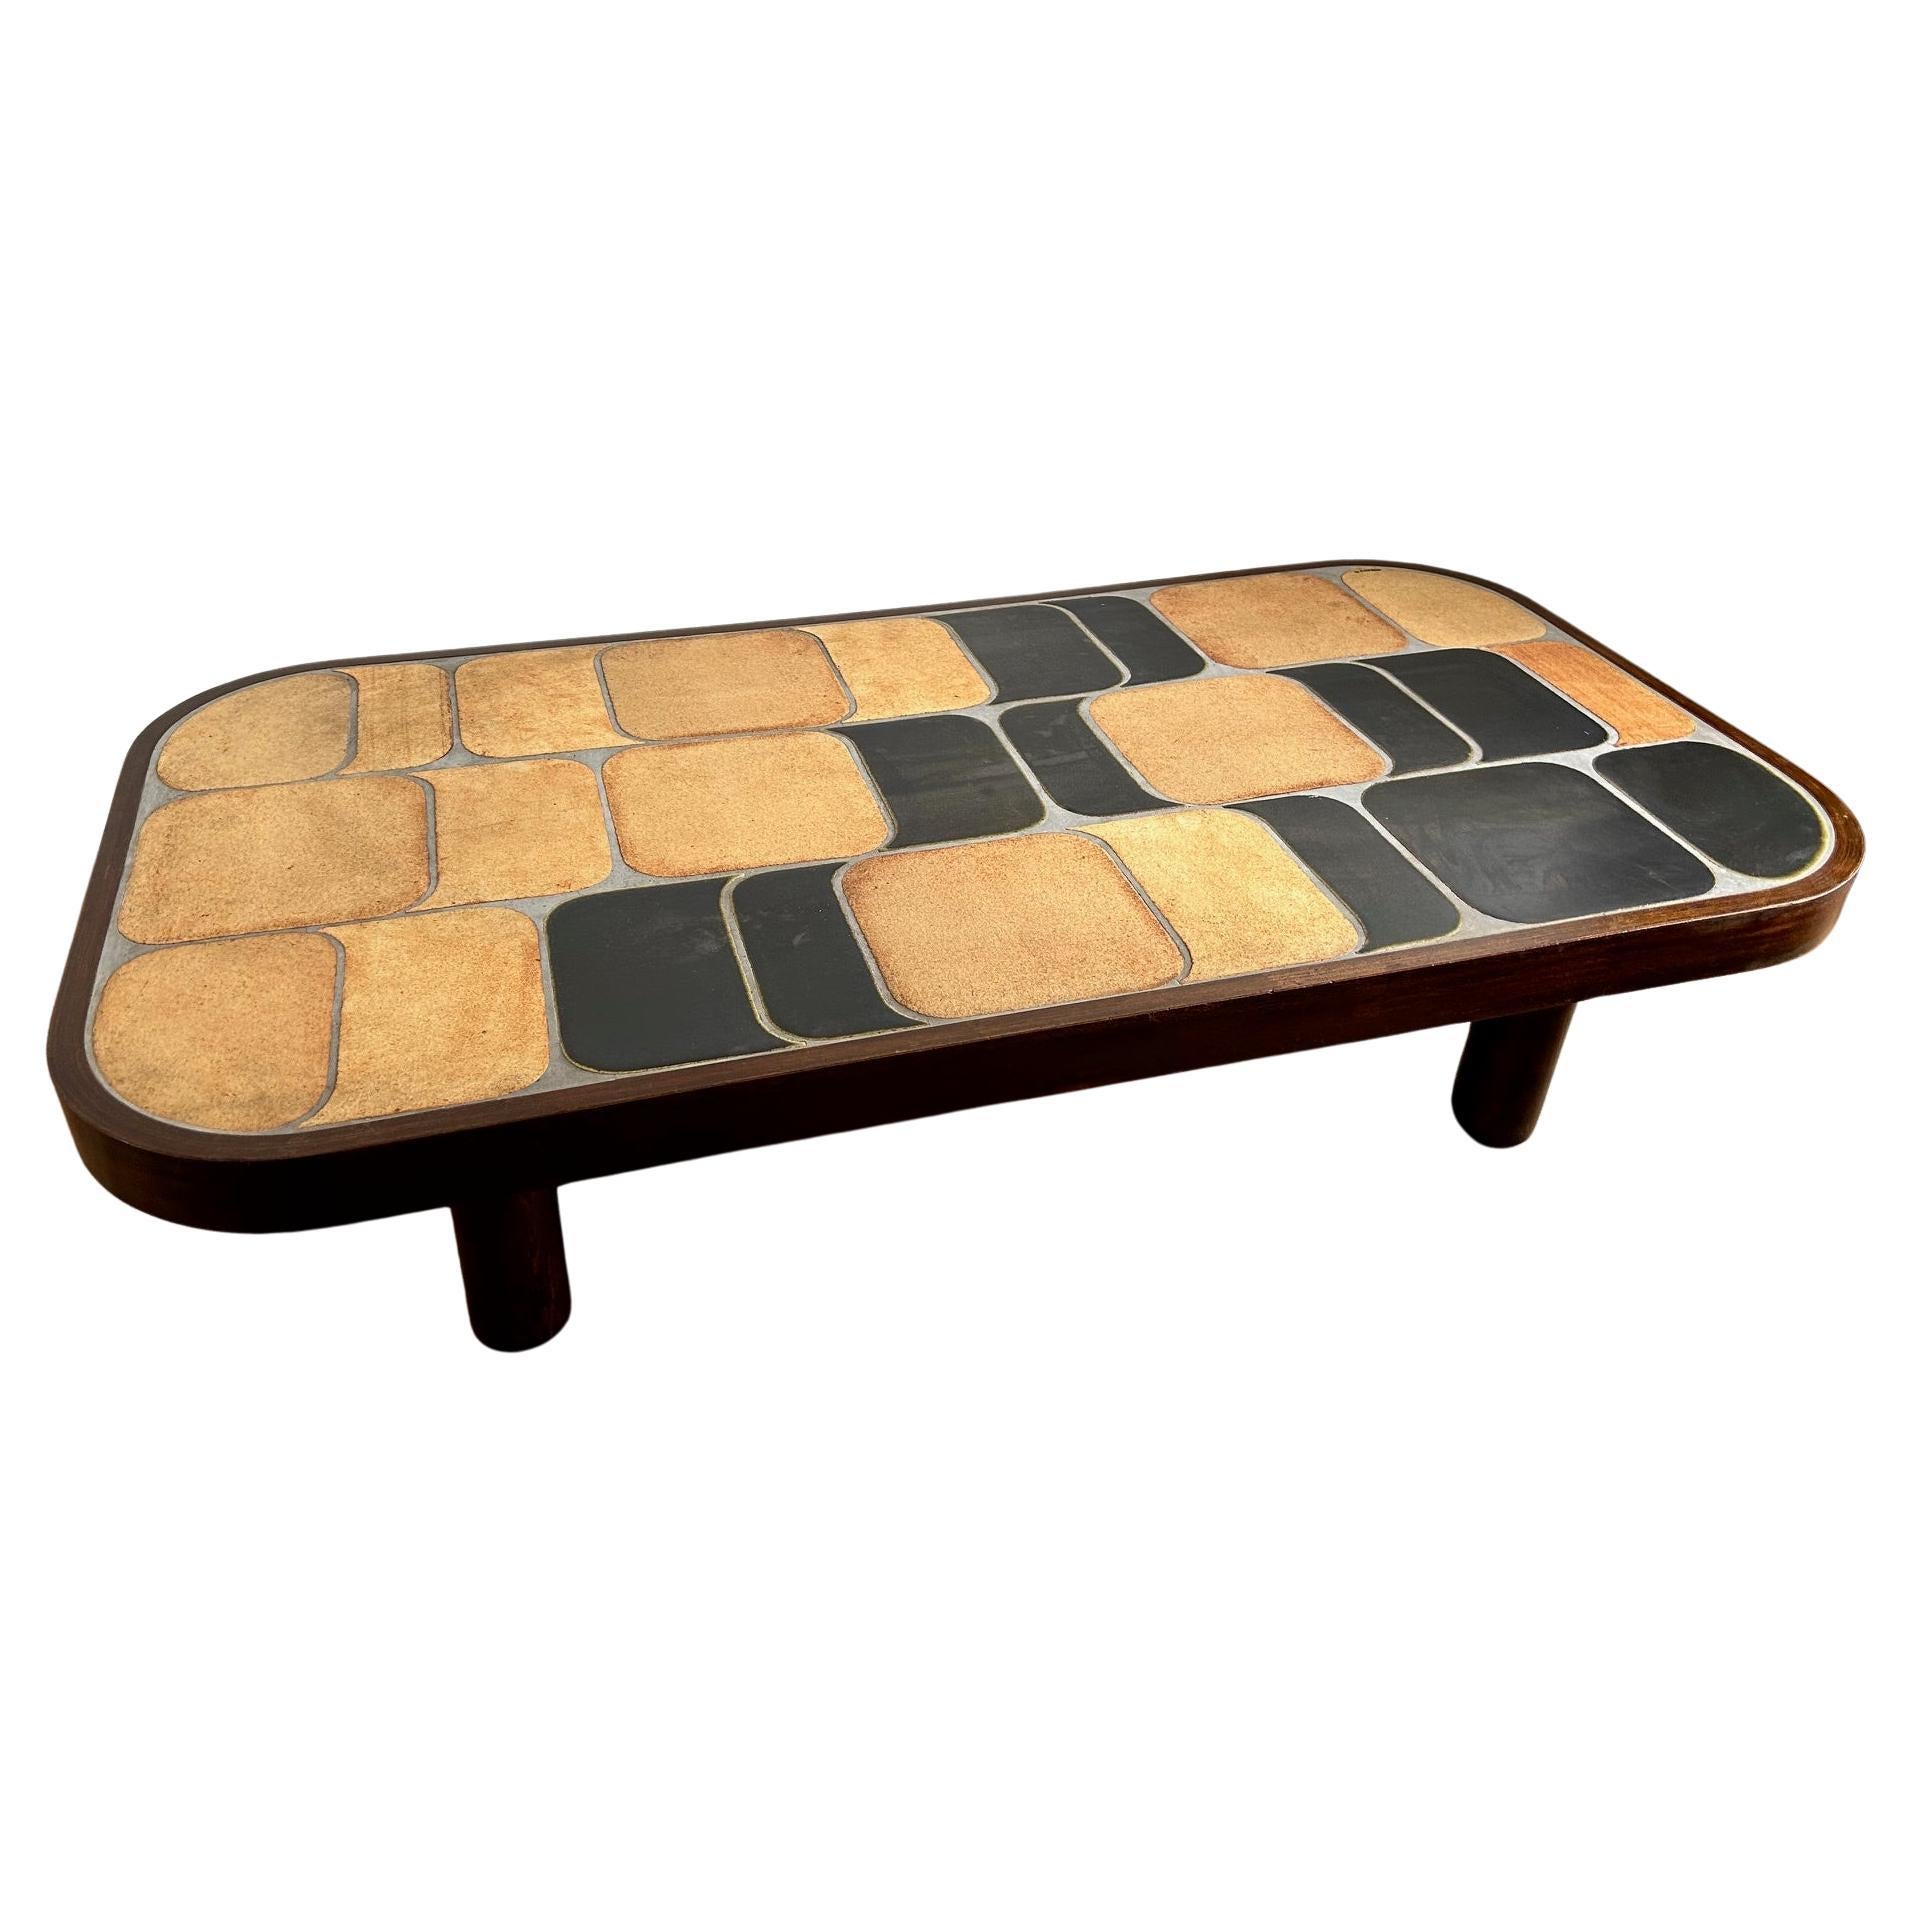 "Shogun" ceramic coffee table by Roger Capron, Vallauris, France, 1970s